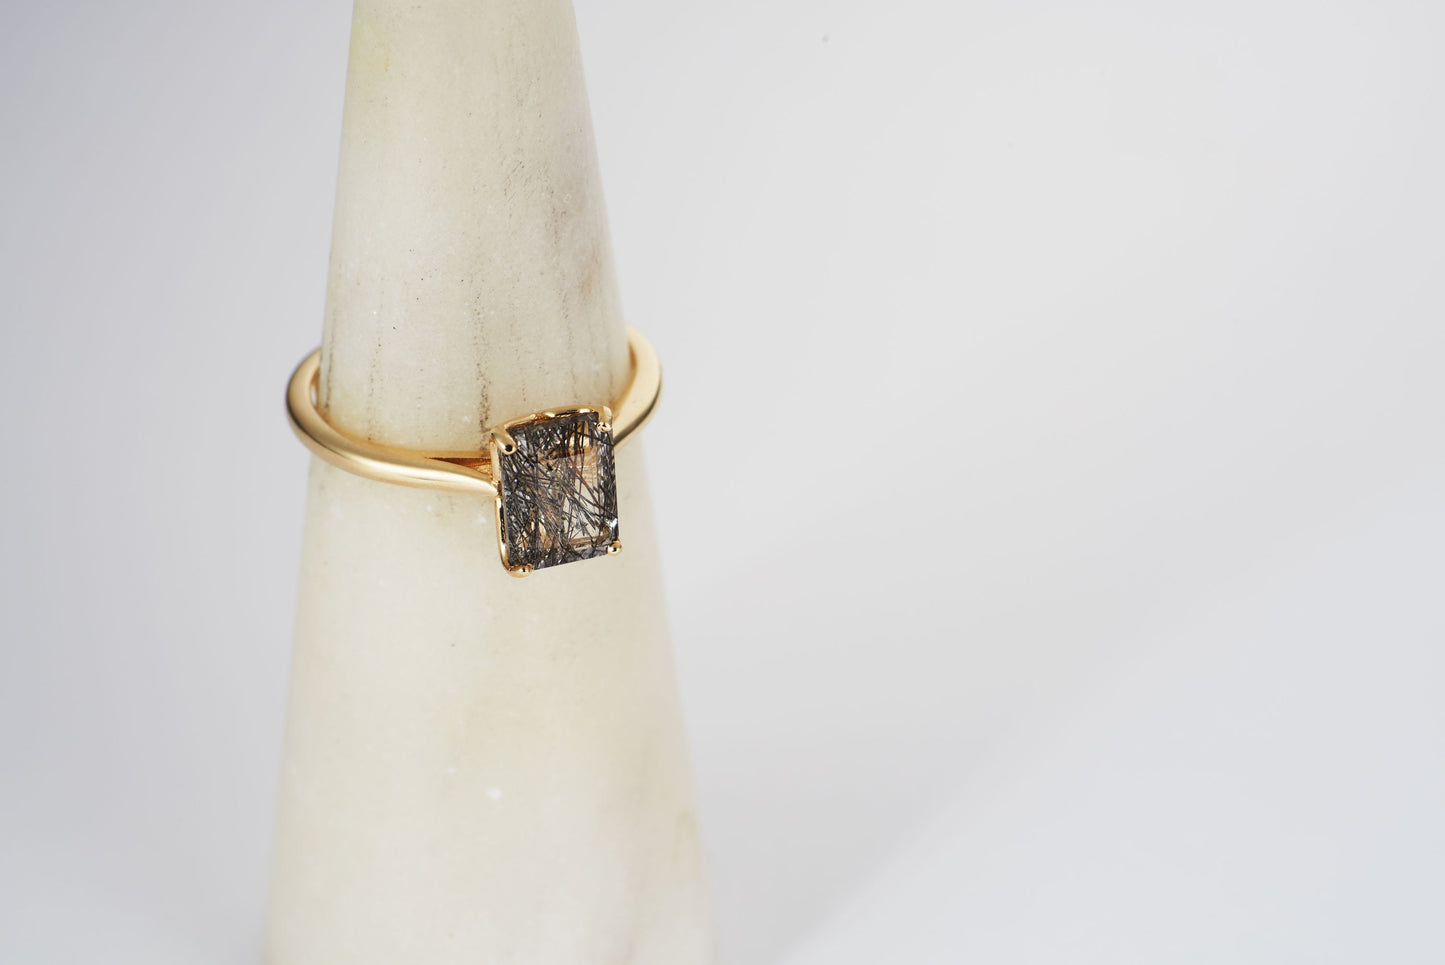 Close up view of the Nico rutile quartz solitaire ring on a ring cone.